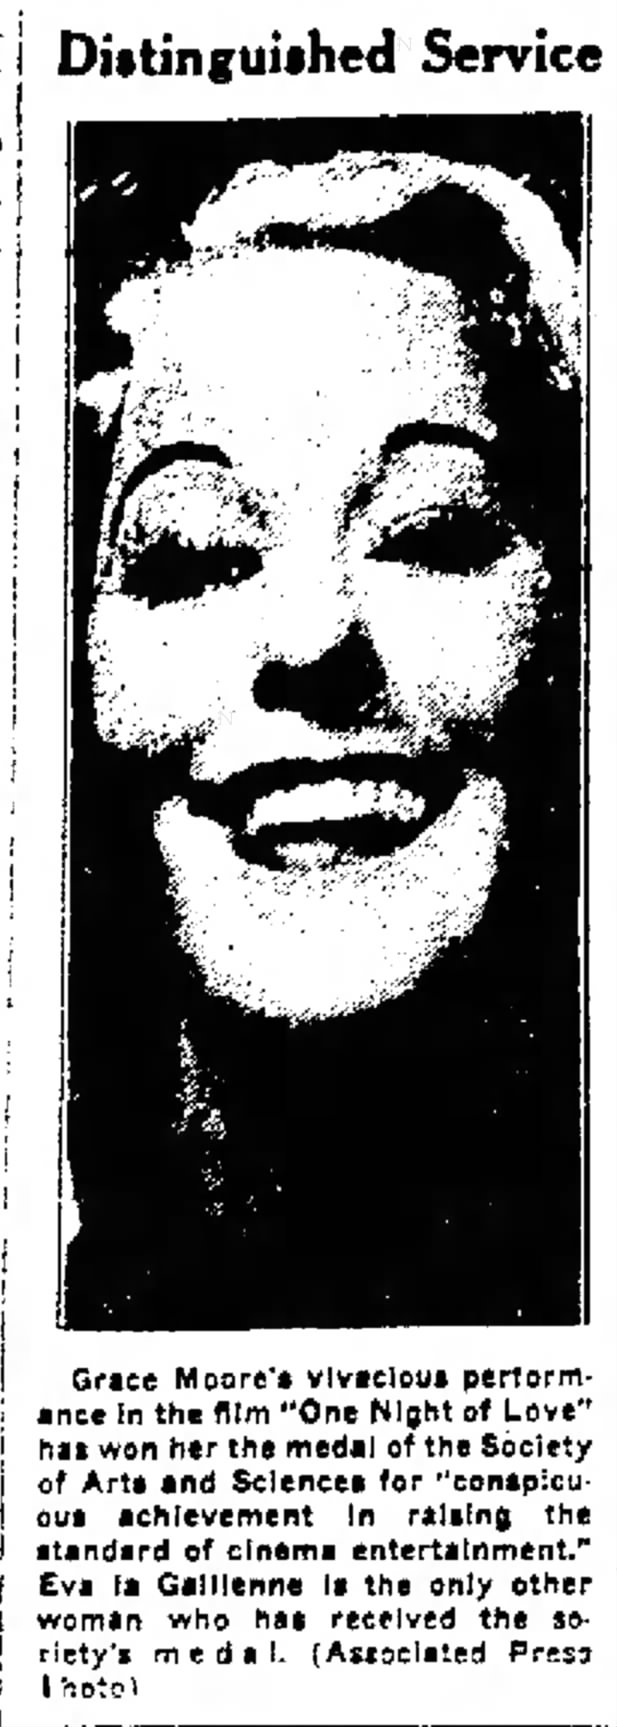 The Kingston Daily Freeman
(Kingston, New York)
6 March 1935  Page 8